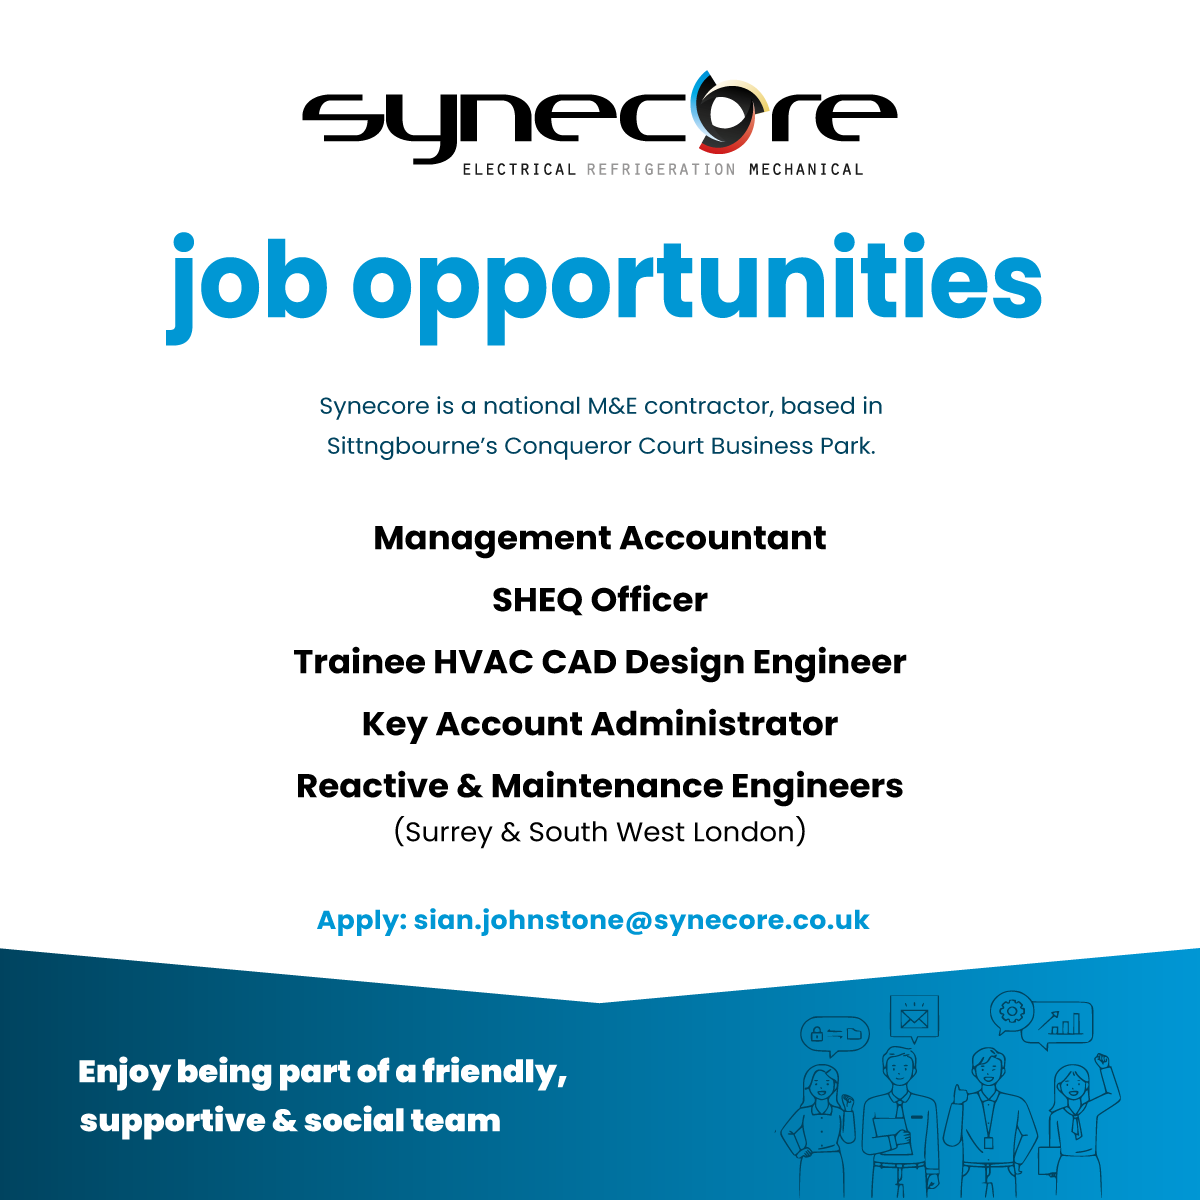 📣 Looking for a great place to work with incredible benefits and amazing people? Check out our latest vacancies. For full details and to apply please email sian.johnstone@synecore.co.uk #job #jobopportunity #recruitment #accounts #accountingjobs #work #cv